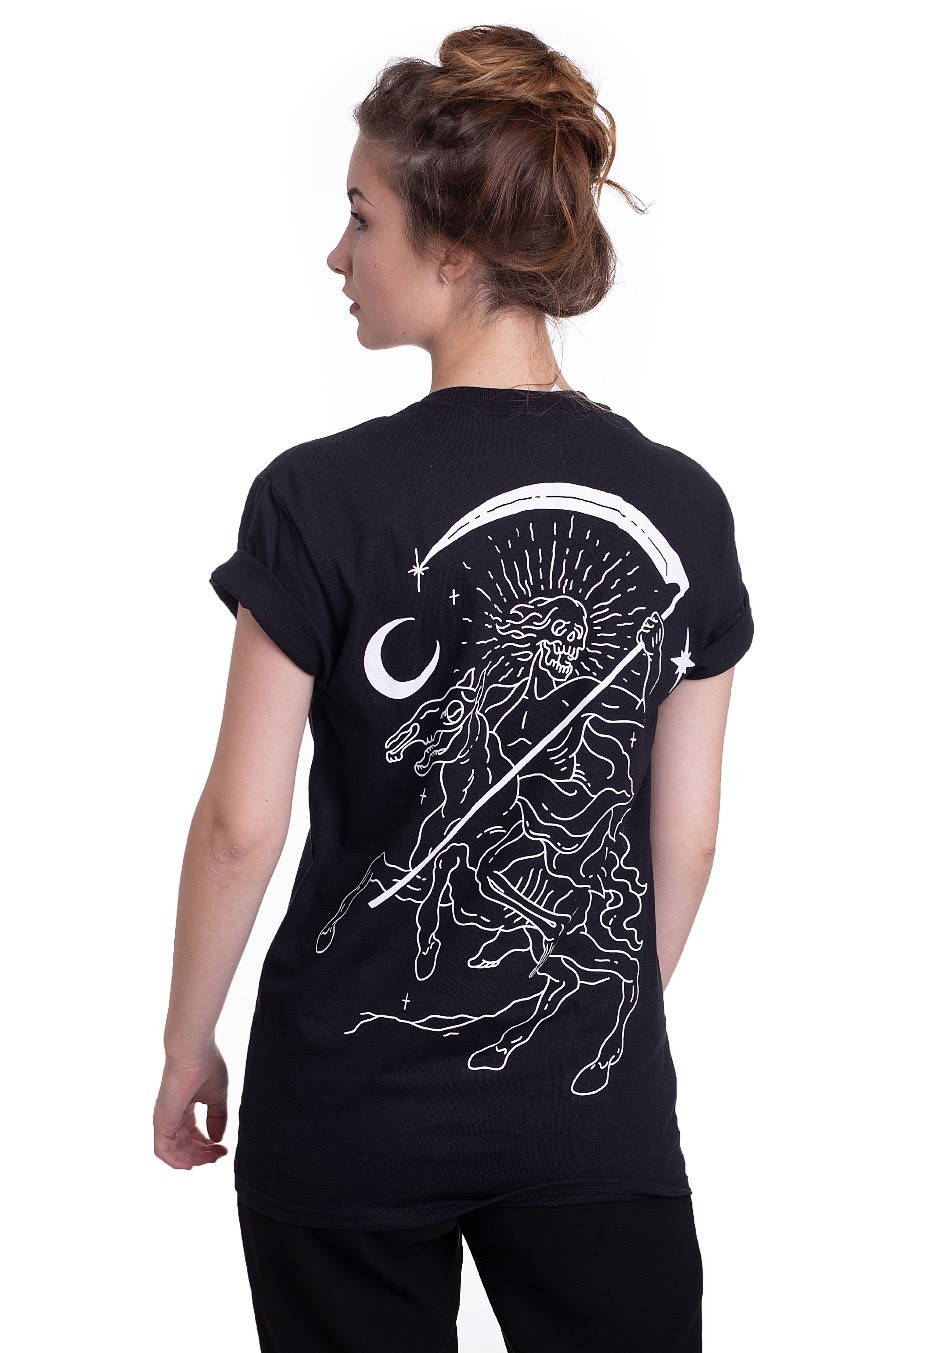 Chelsea Grin - The Grim Reaper - - T-Shirts